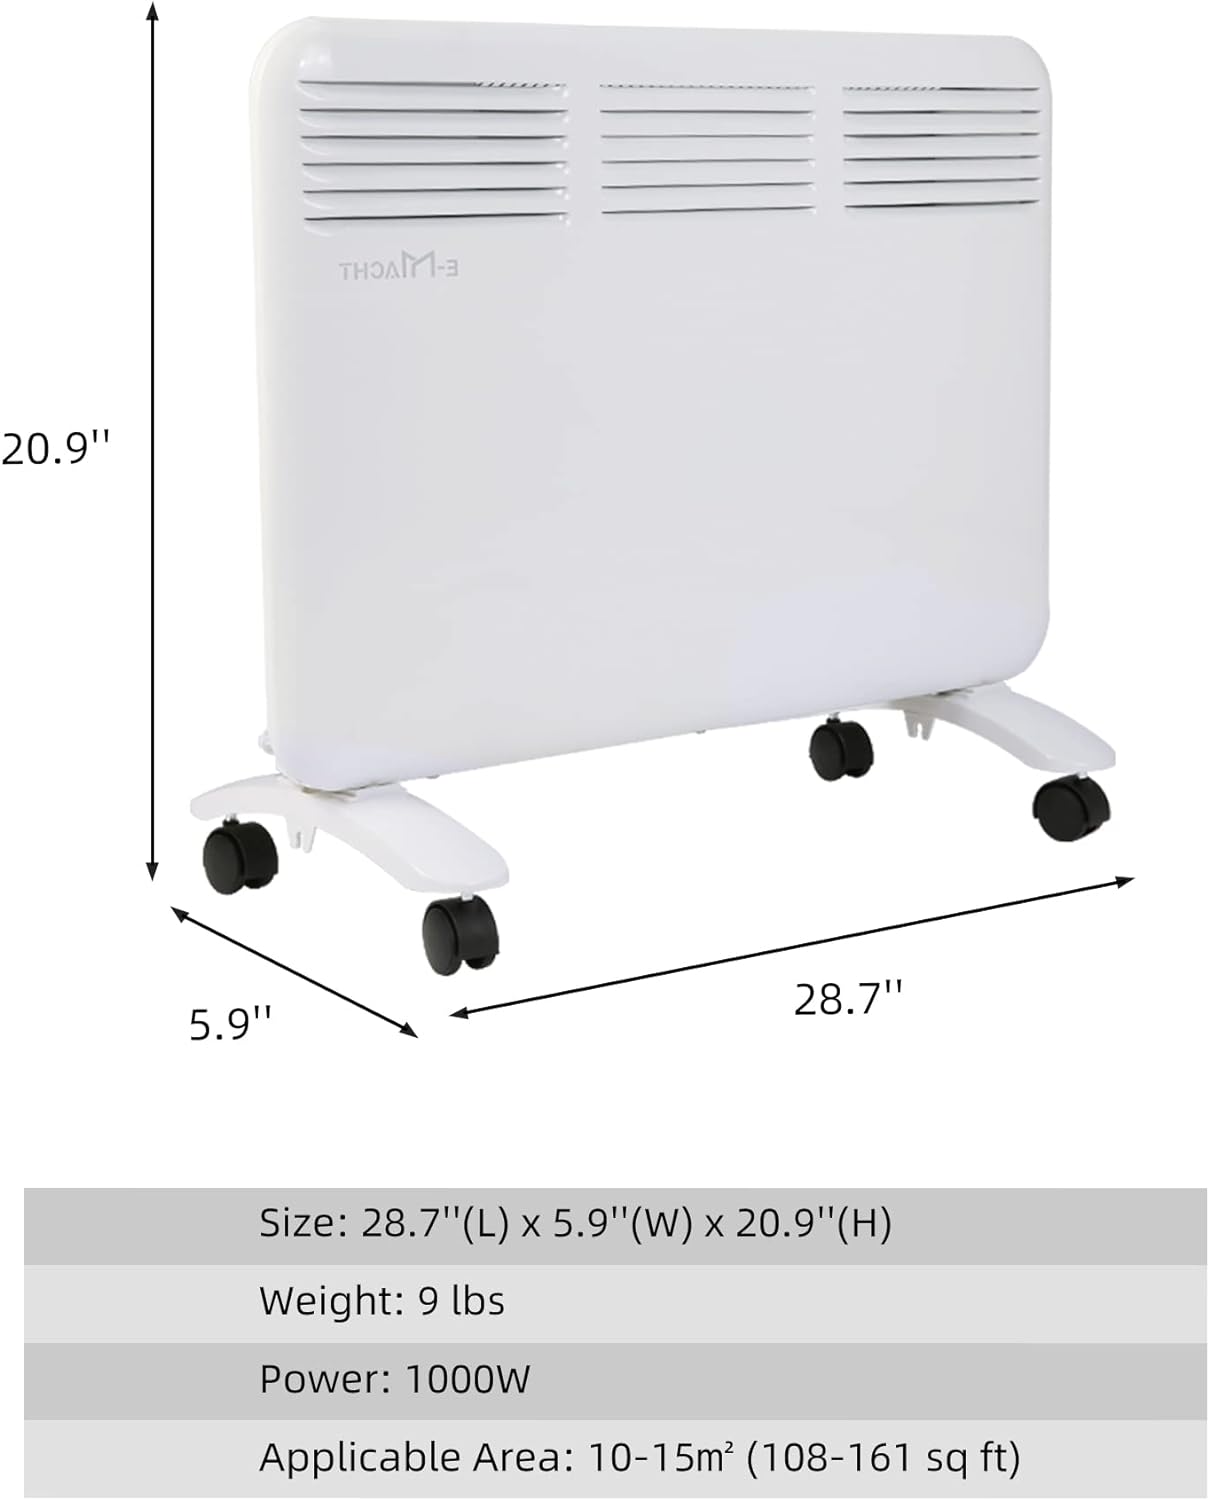 1000W Wall-Mounted Space Heater with Adjustable Thermostat, Portable Convection Freestanding Heater